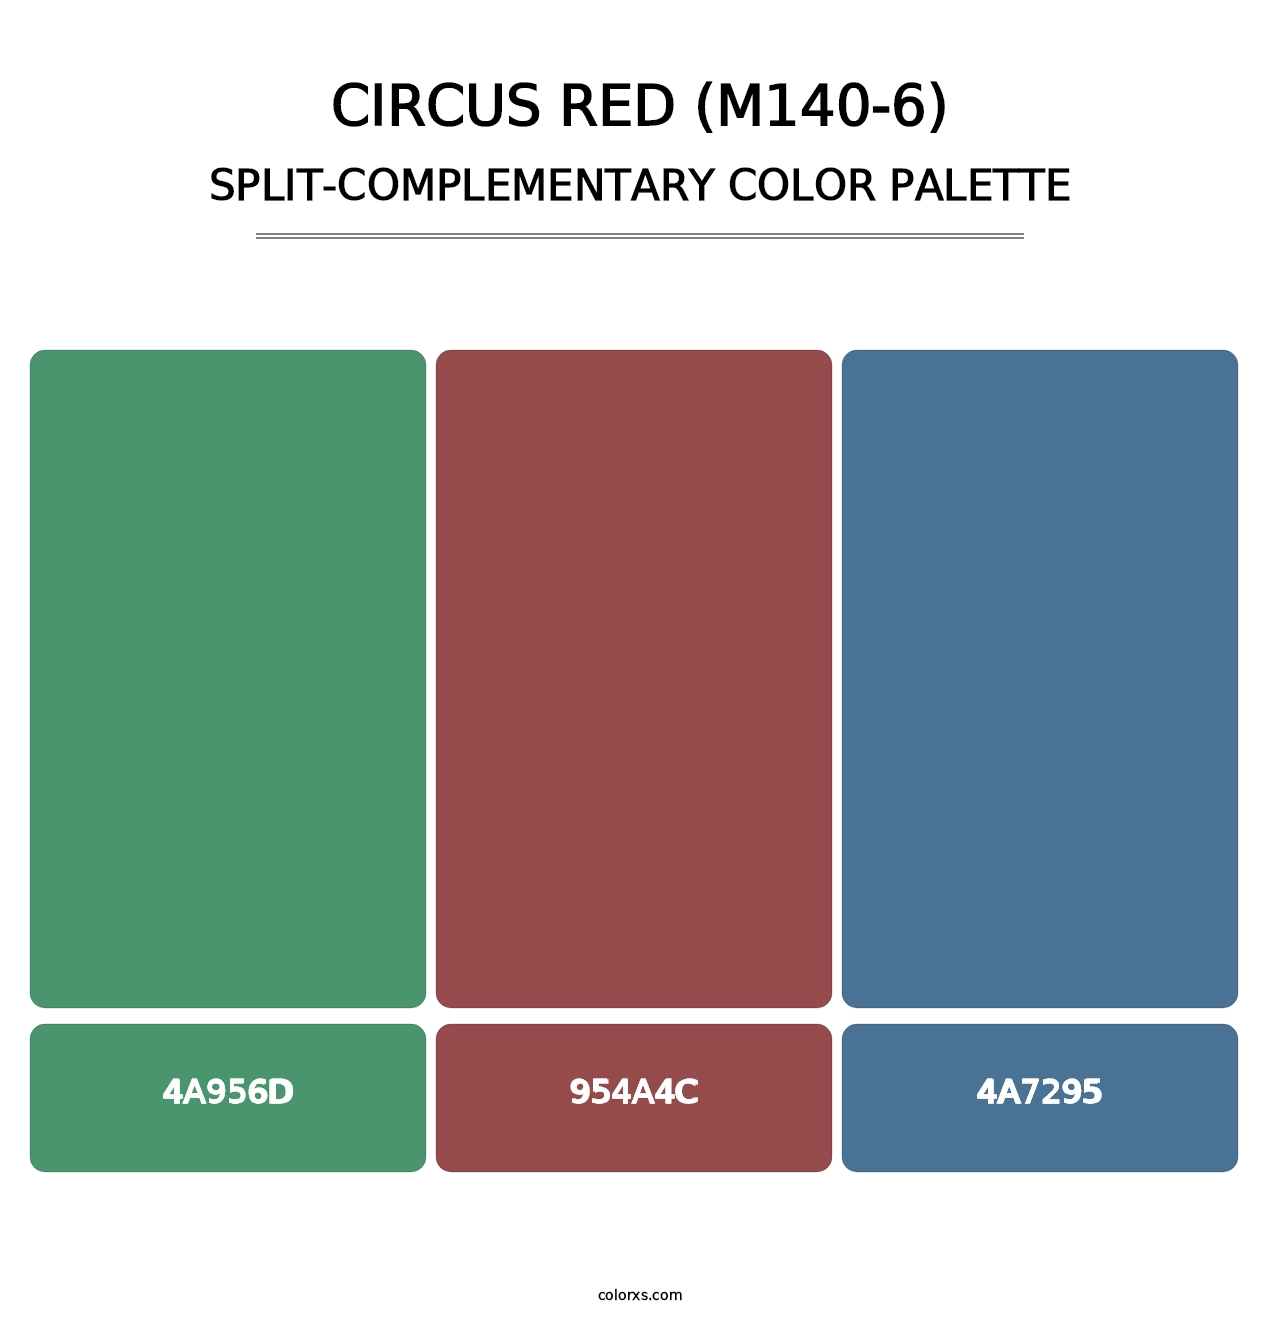 Circus Red (M140-6) - Split-Complementary Color Palette